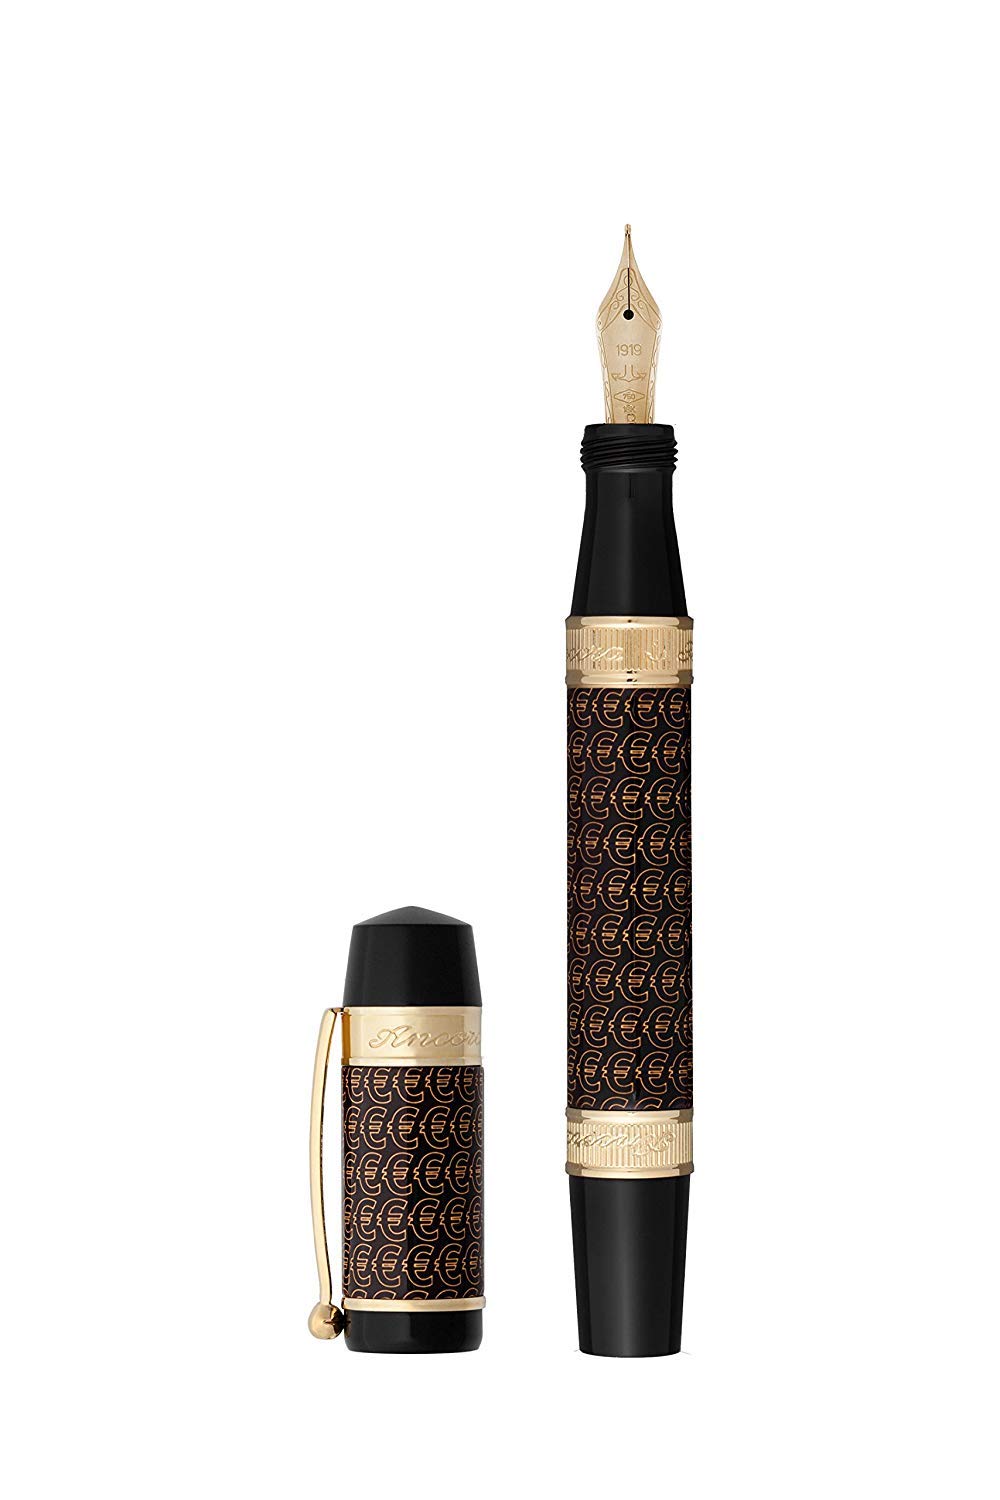 Ancora Limited Edition Euro 18K Gold Nib Fountain Pen Cartridge Converter Filler Only 88 pieces were exclusively Hand Made in Italy Since 1919 Each...